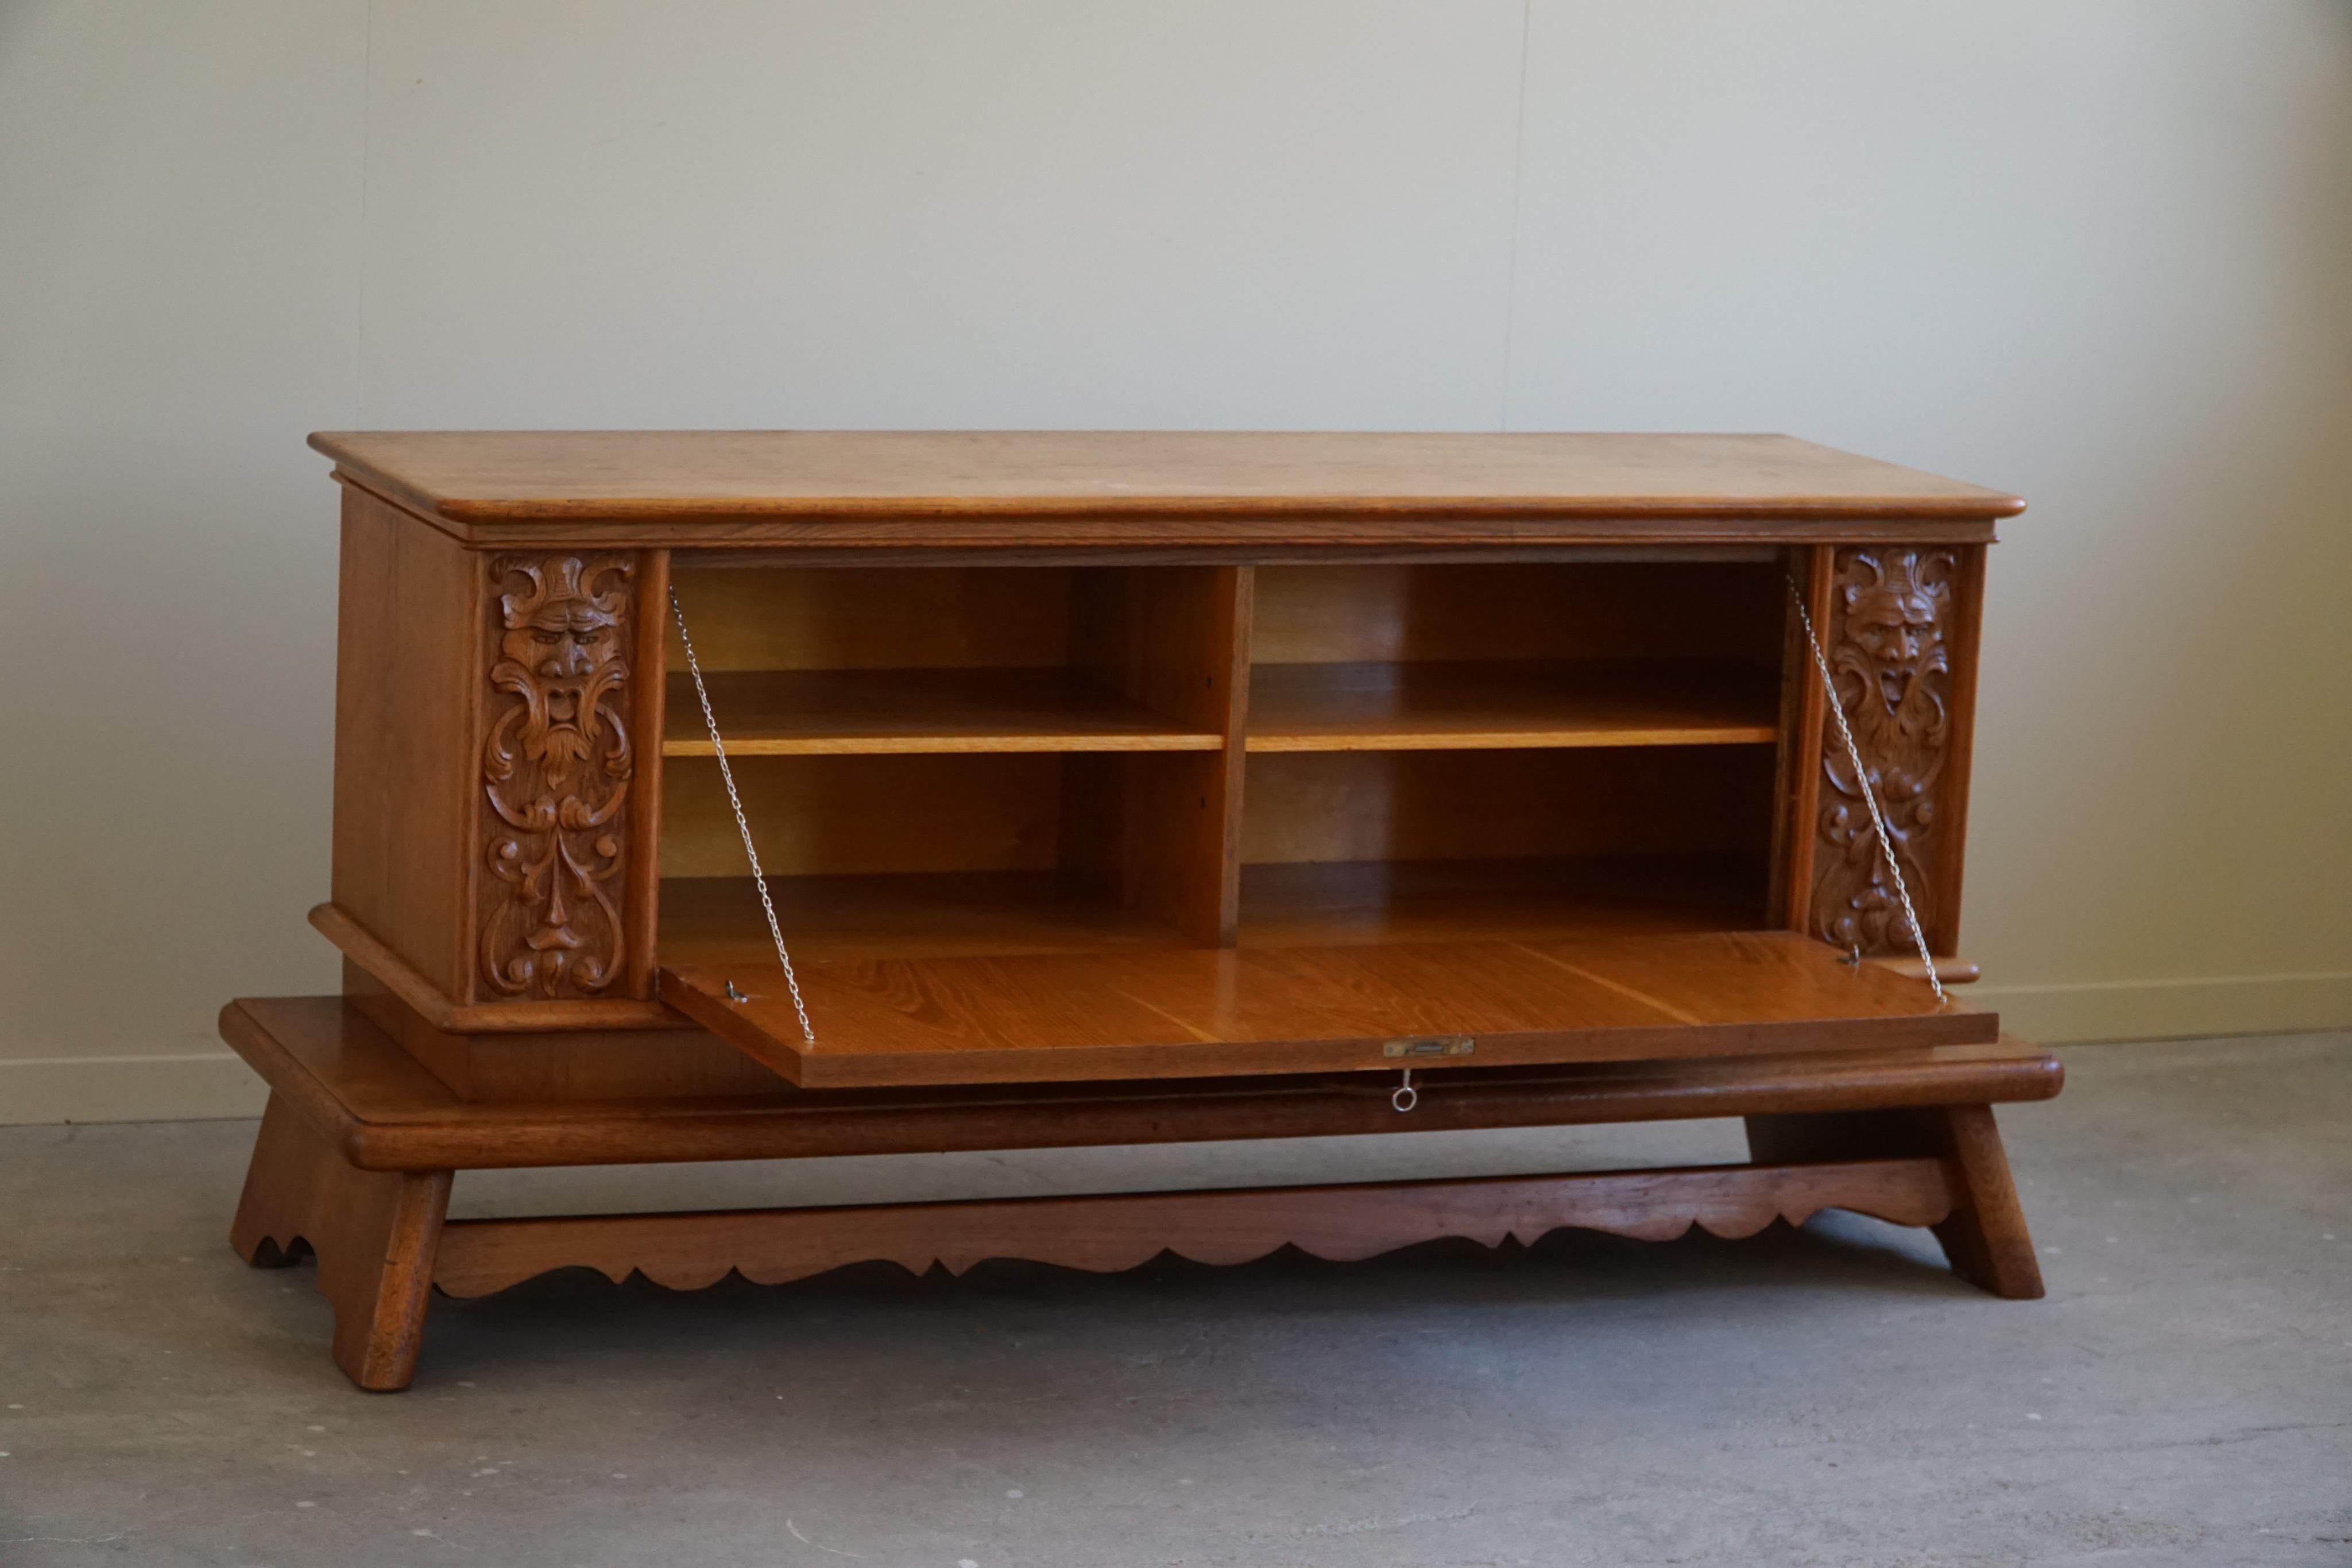 Danish Art Deco Sideboard Credenza in Solid Oak, Early 20th Century In Fair Condition For Sale In Odense, DK